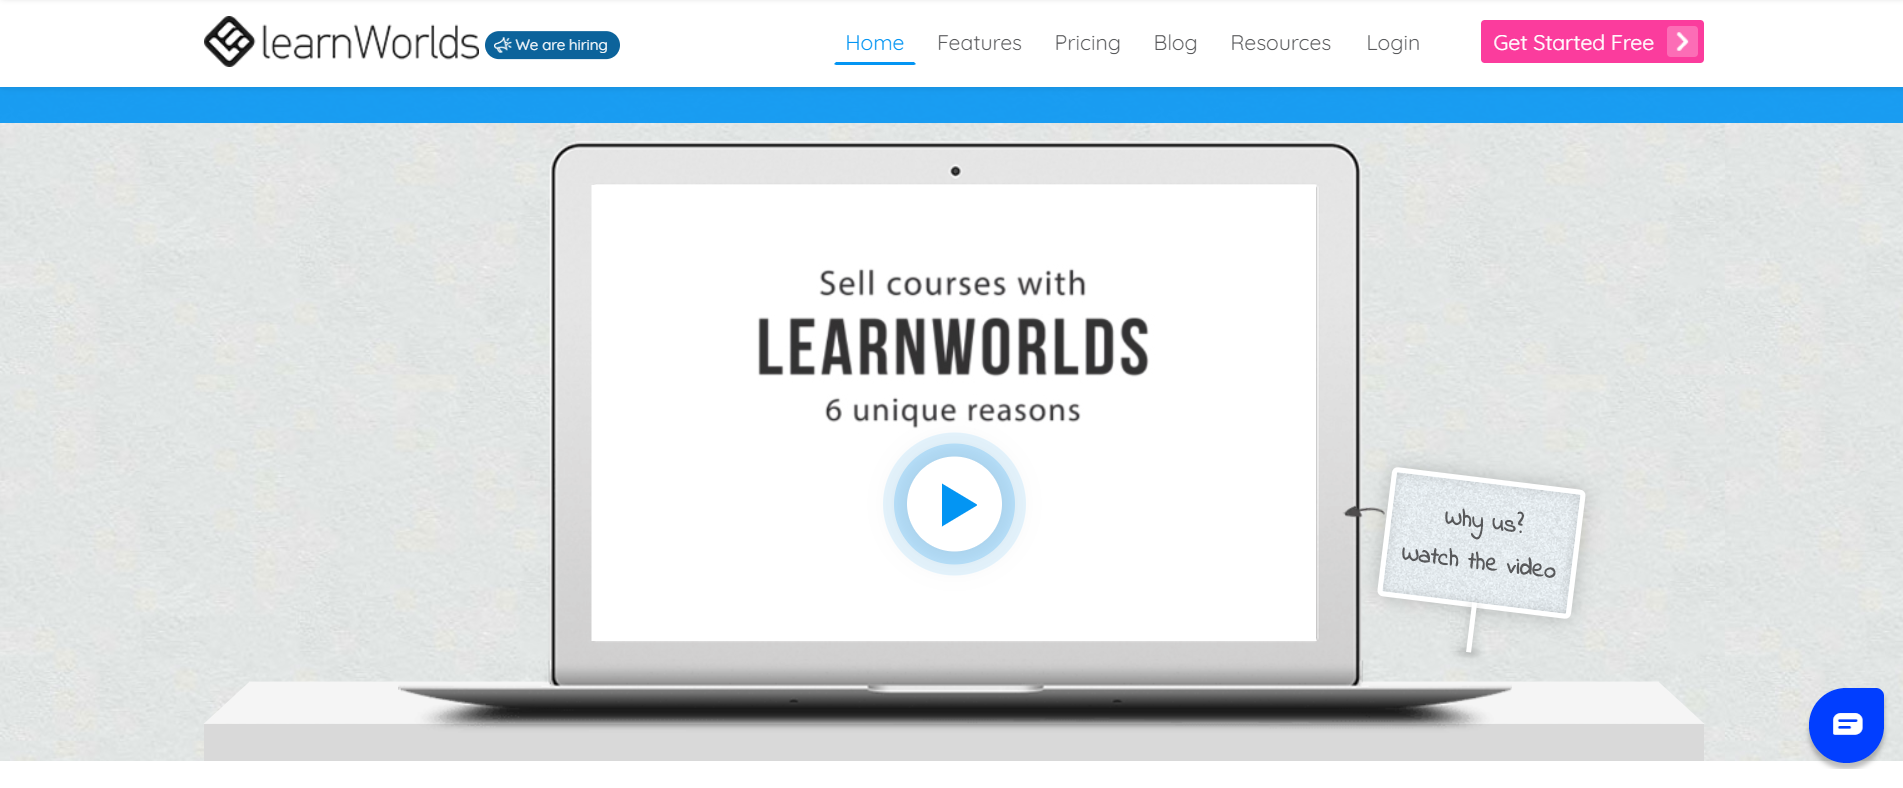 LearnWorld Overview